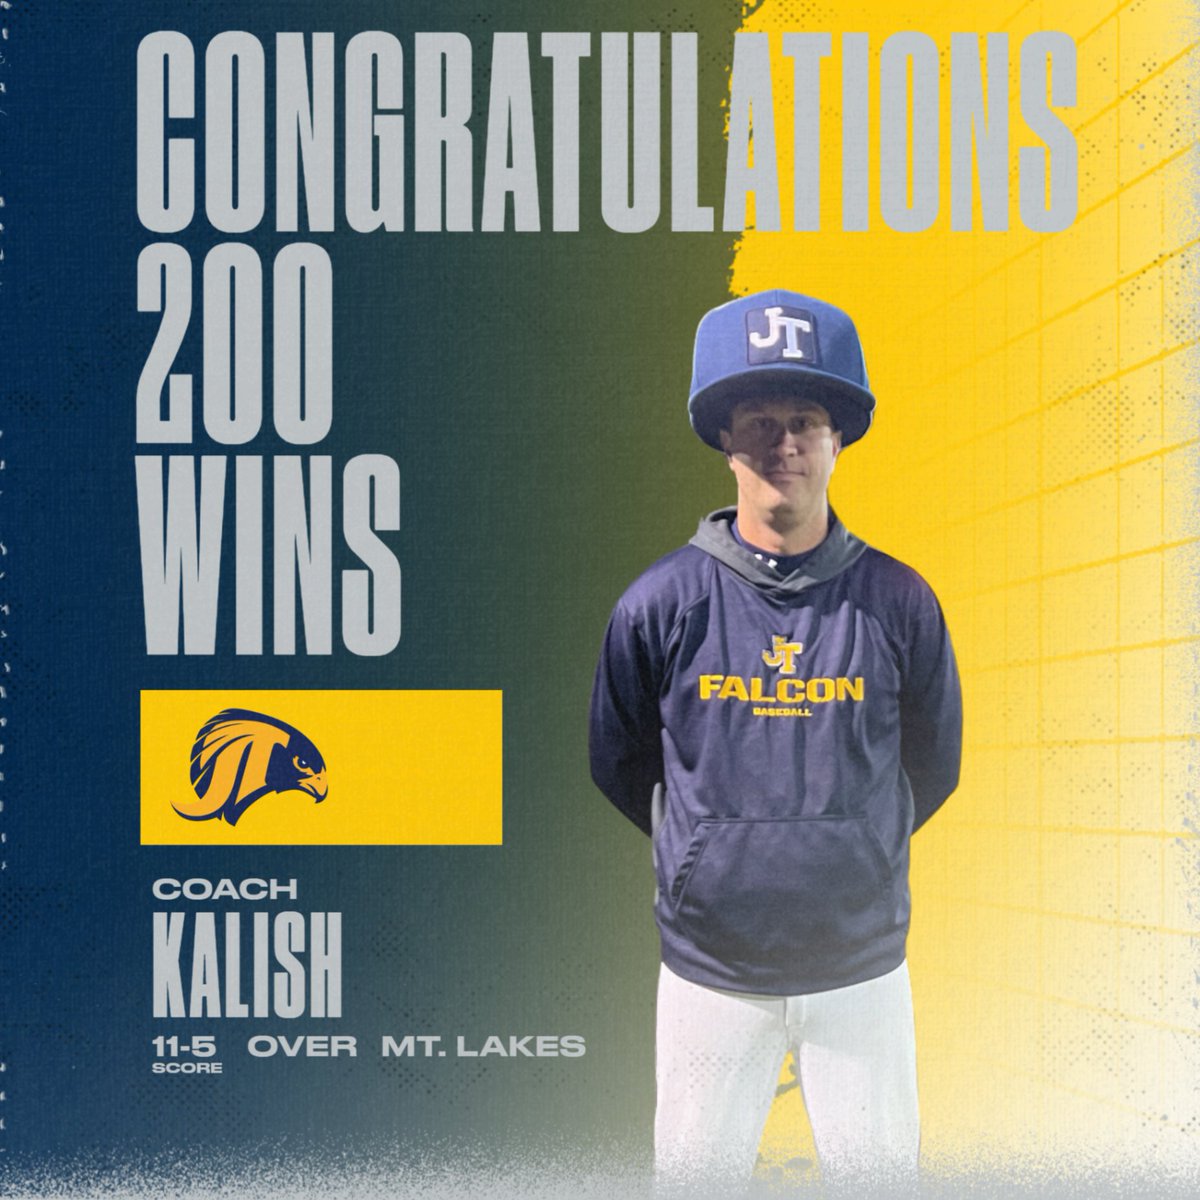 Congratulations to Baseball's own Coach Kalish on your 200th career victory!!! #FalconPride